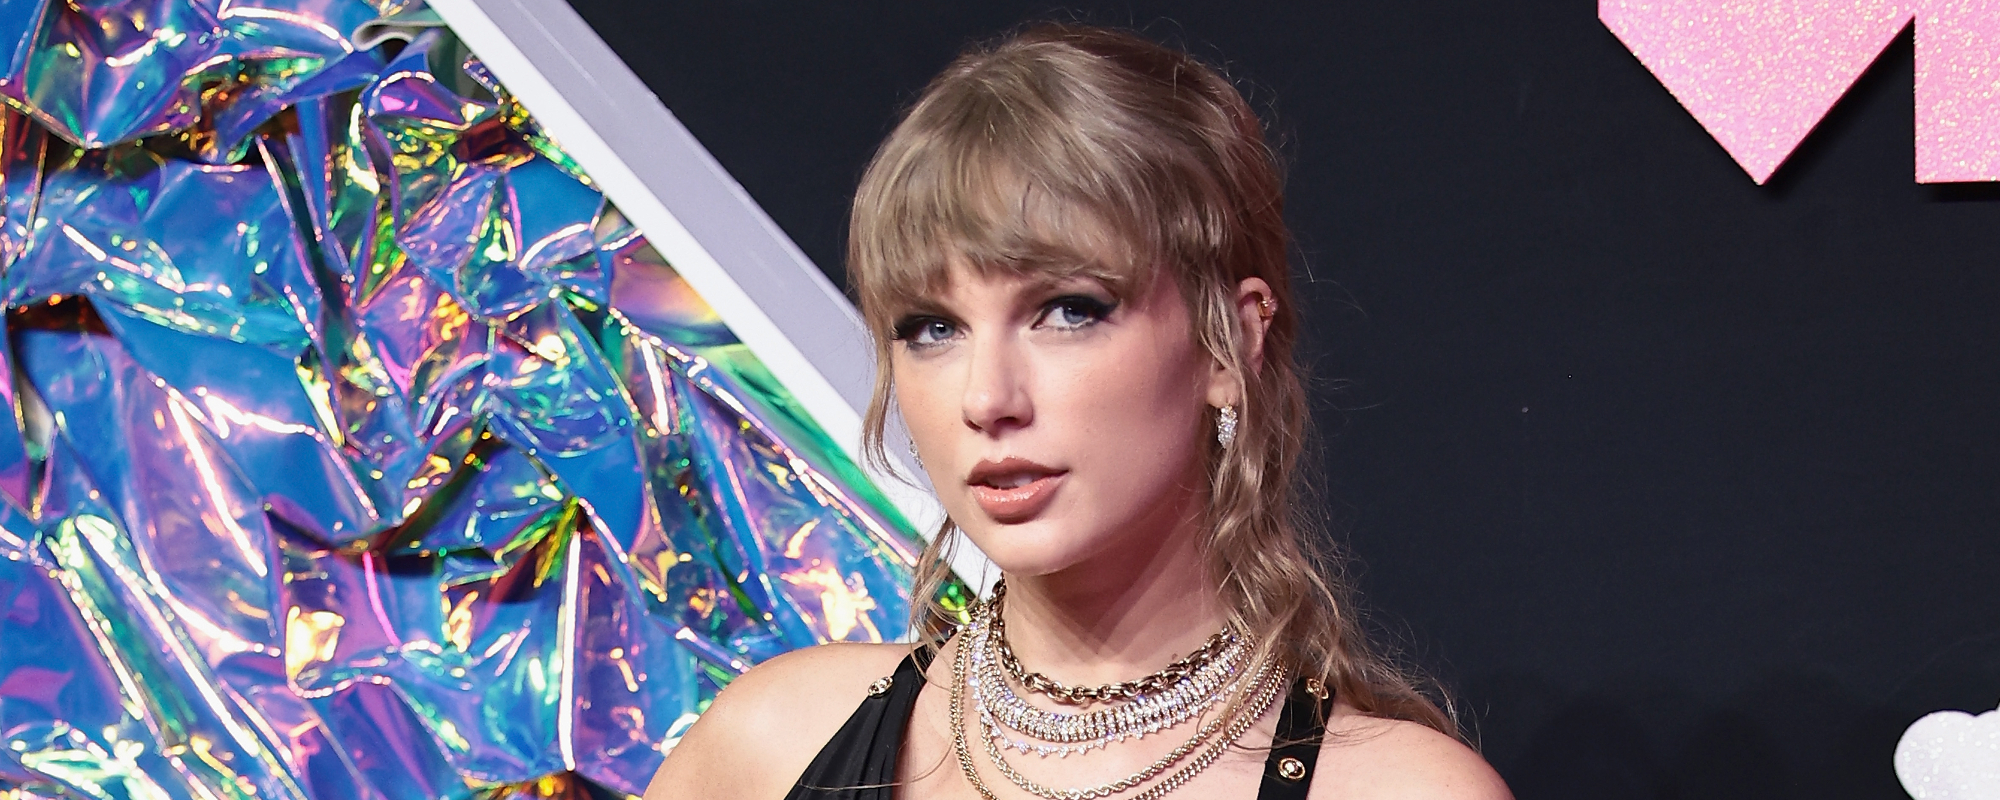 Taylor Swift Wrote “Willow” in Less Than 10 Minutes, Says Collaborator: “It Was Like an Earthquake”